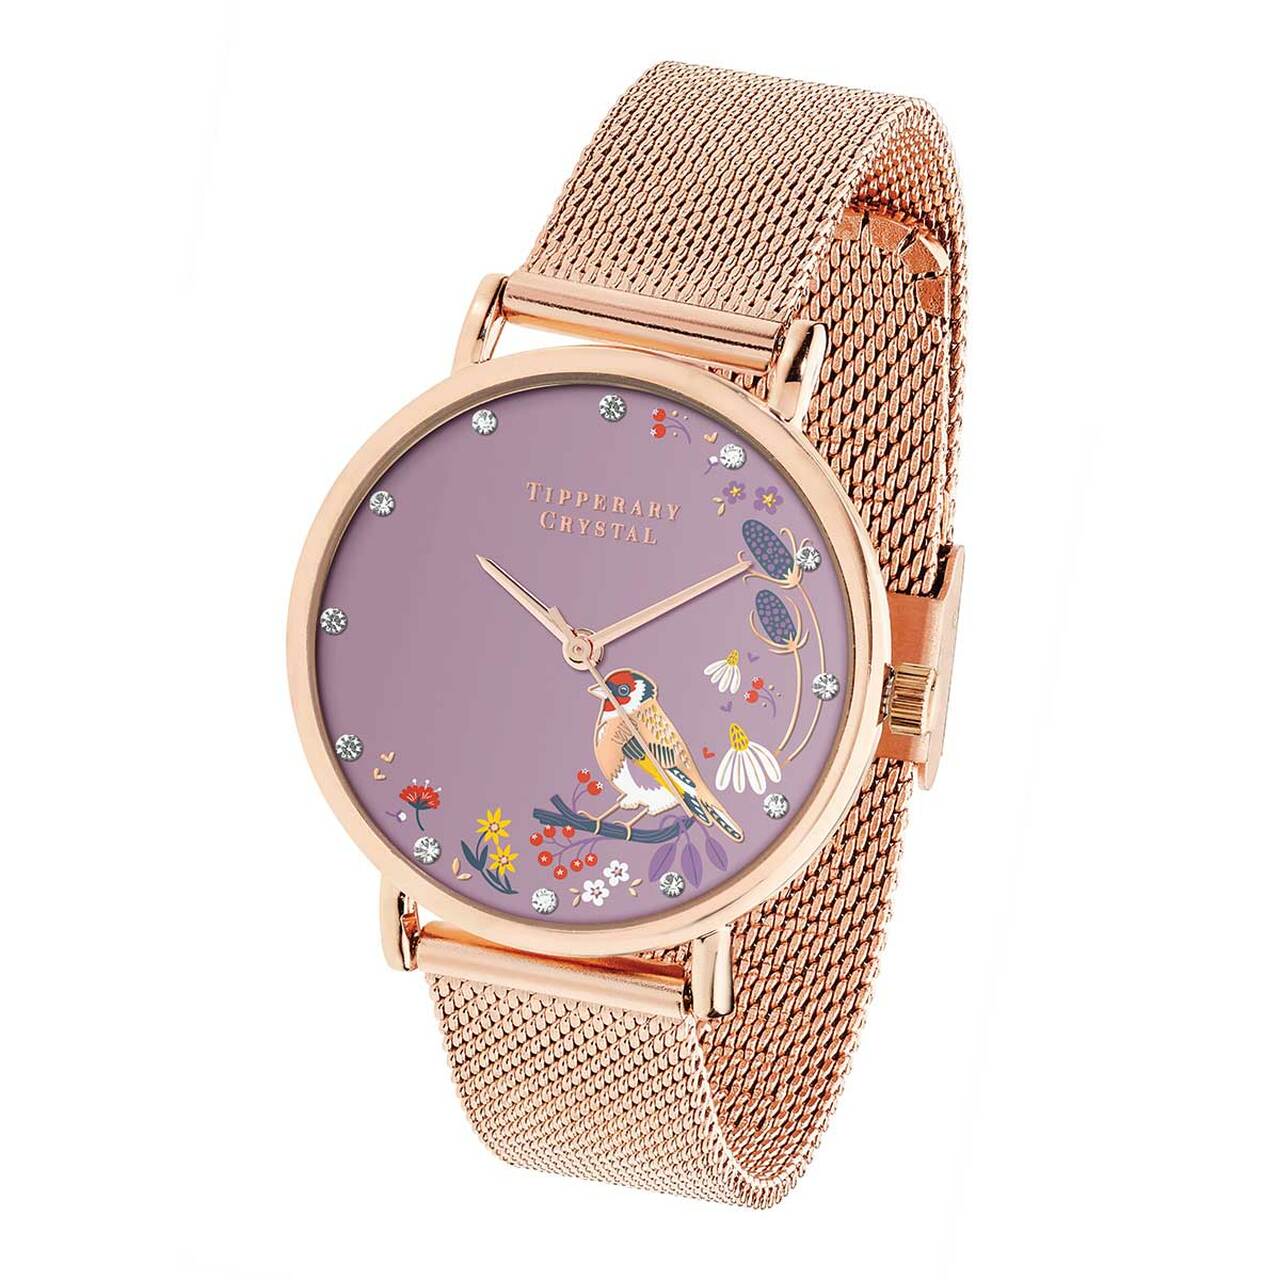 Tipperary Crystal Watch - Birdy Rose Gold